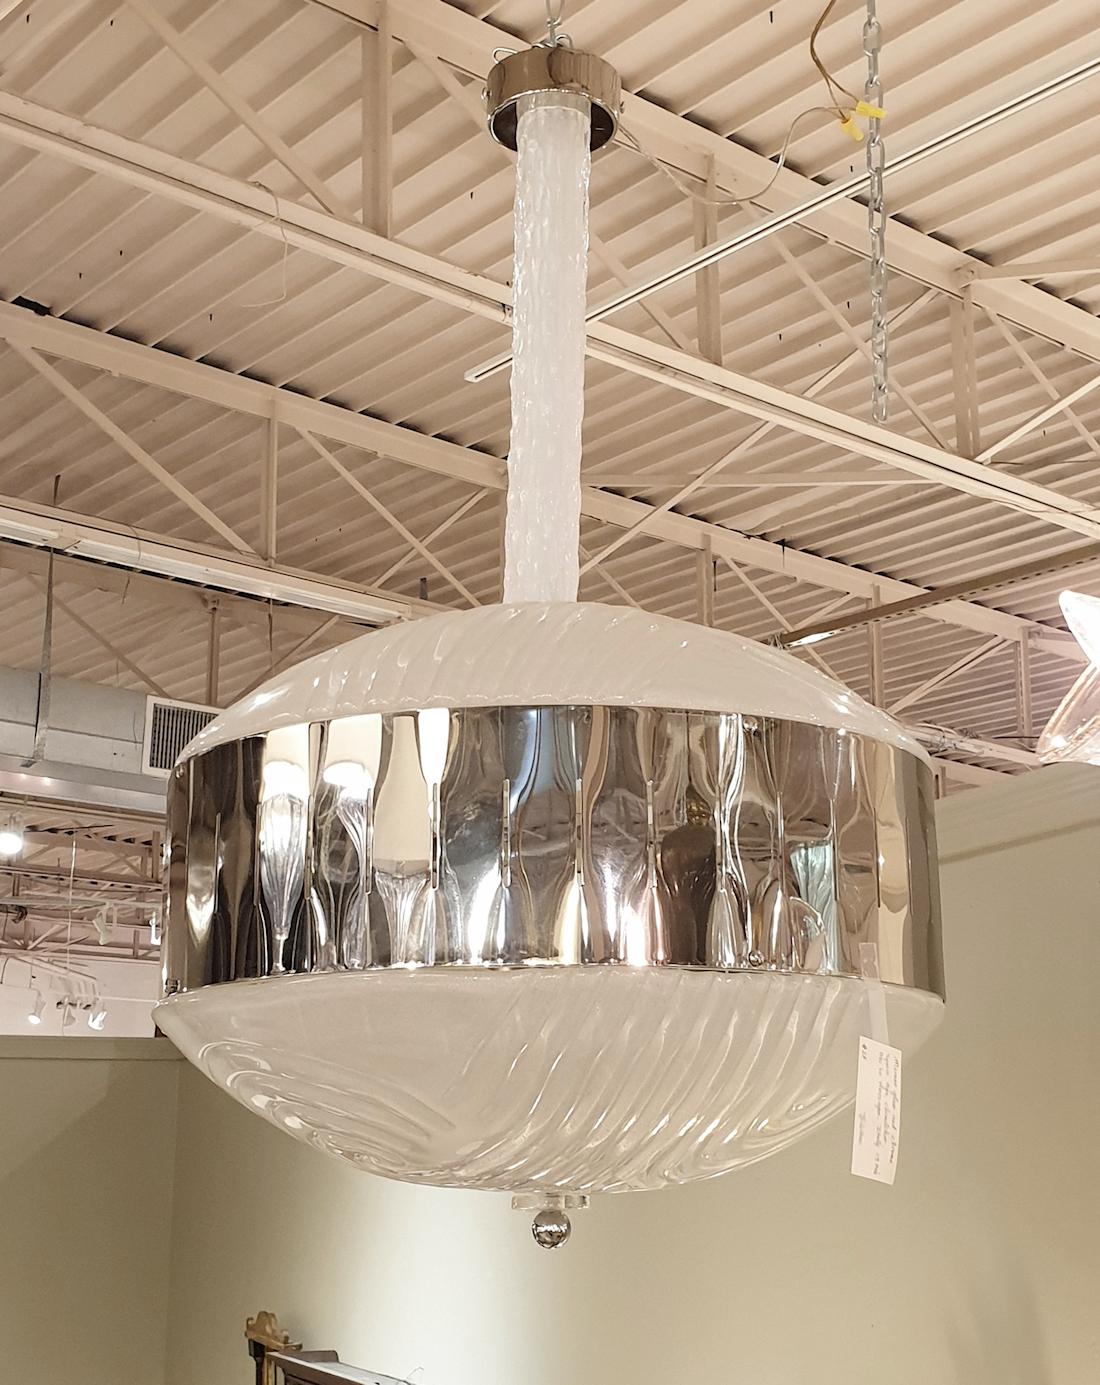 A large Space-Age Murano glass pendant light or chandelier, Italy circa 1970s, Mazzega style.
The Mid-century modern chandelier is made of Murano frosted glass and a chrome frame.
The top and bottom very large bowls and the center stem are made of